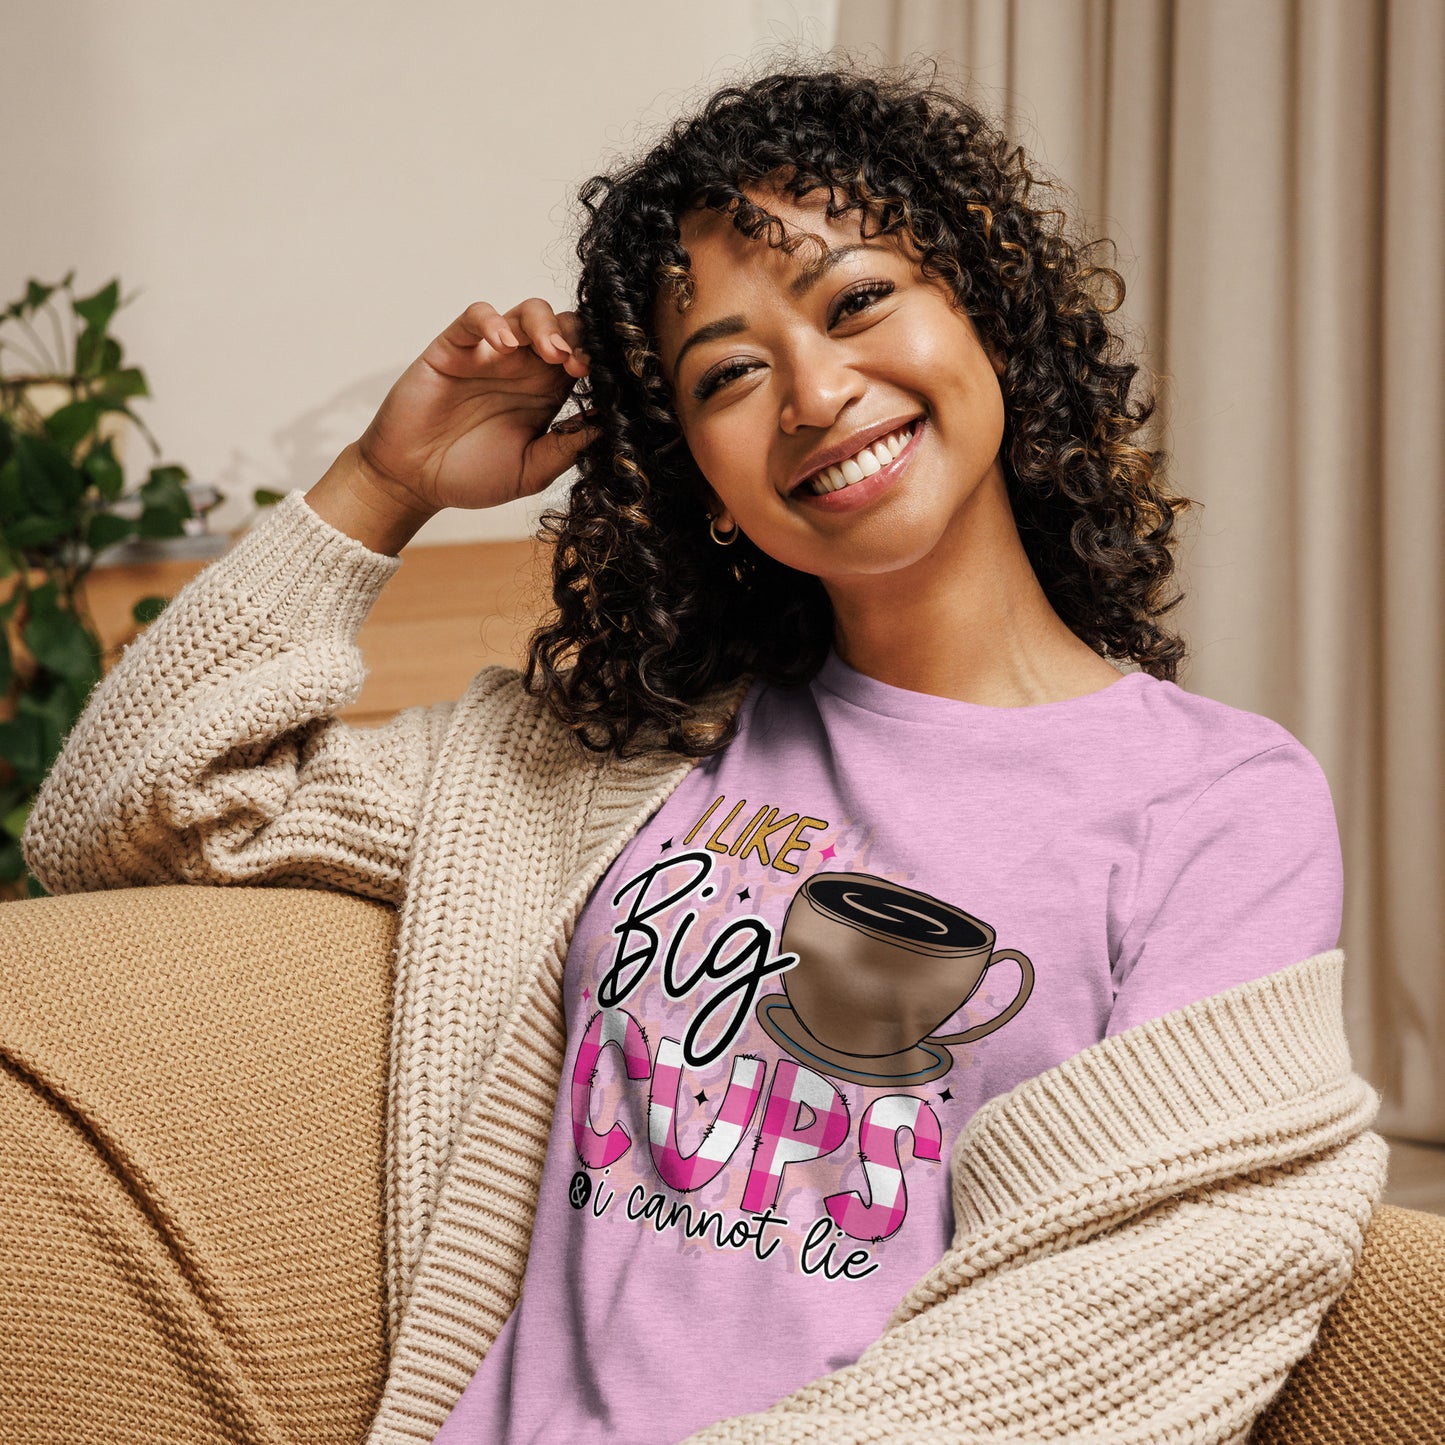 “I Like Big Cups” Women's Relaxed T-Shirt